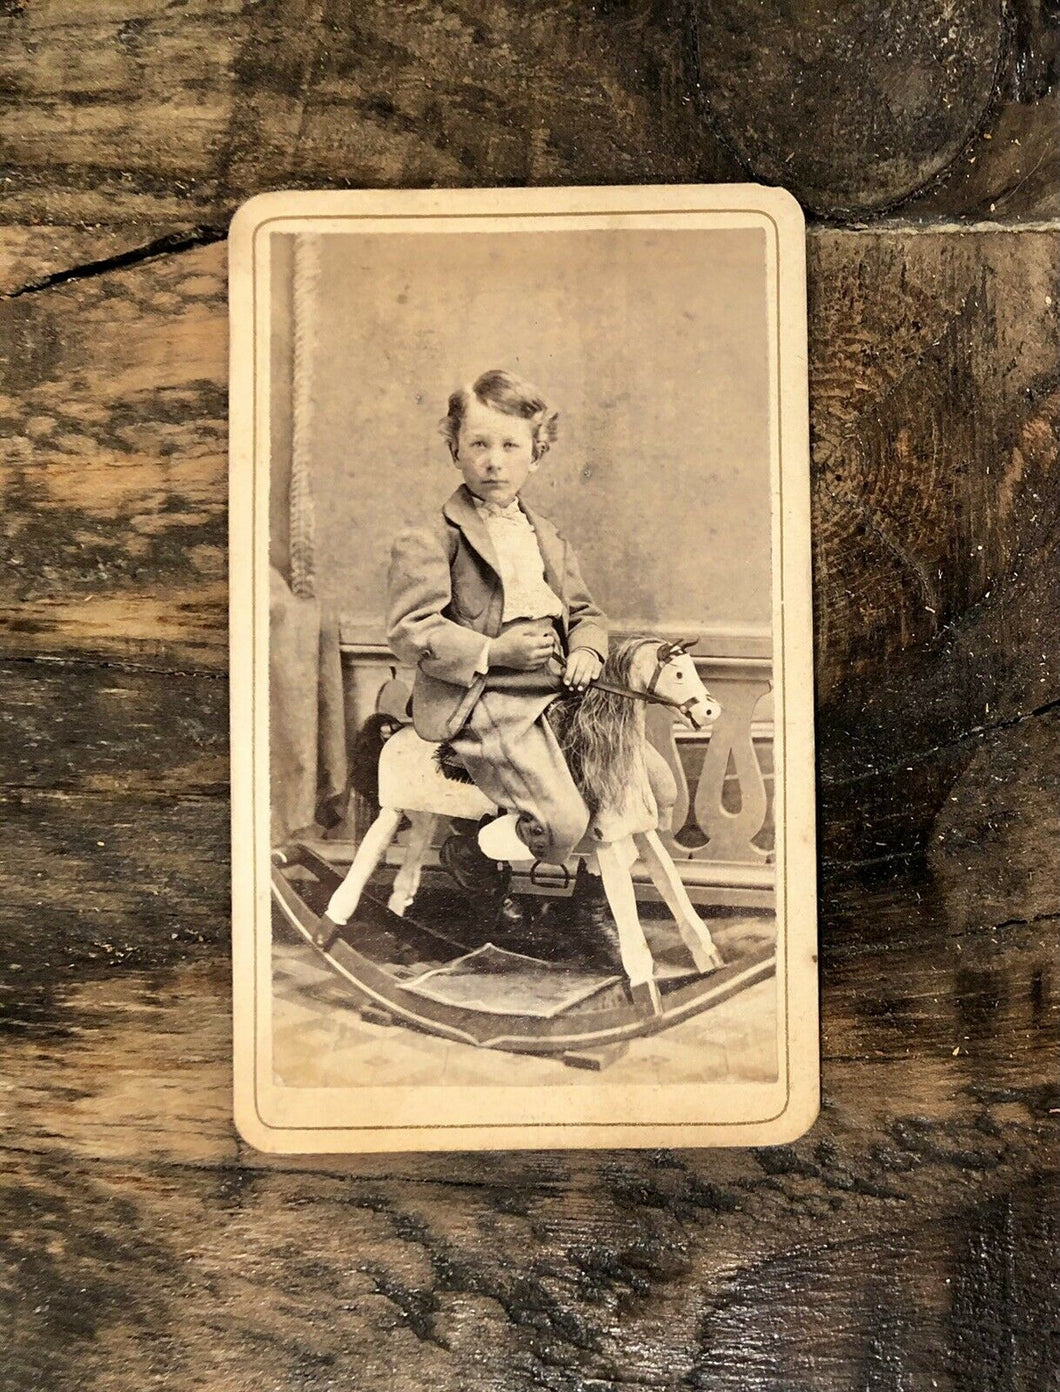 Hackensack New Jersey Boy Too Big for Toy Rocking Horse - 1800s CDV Photo